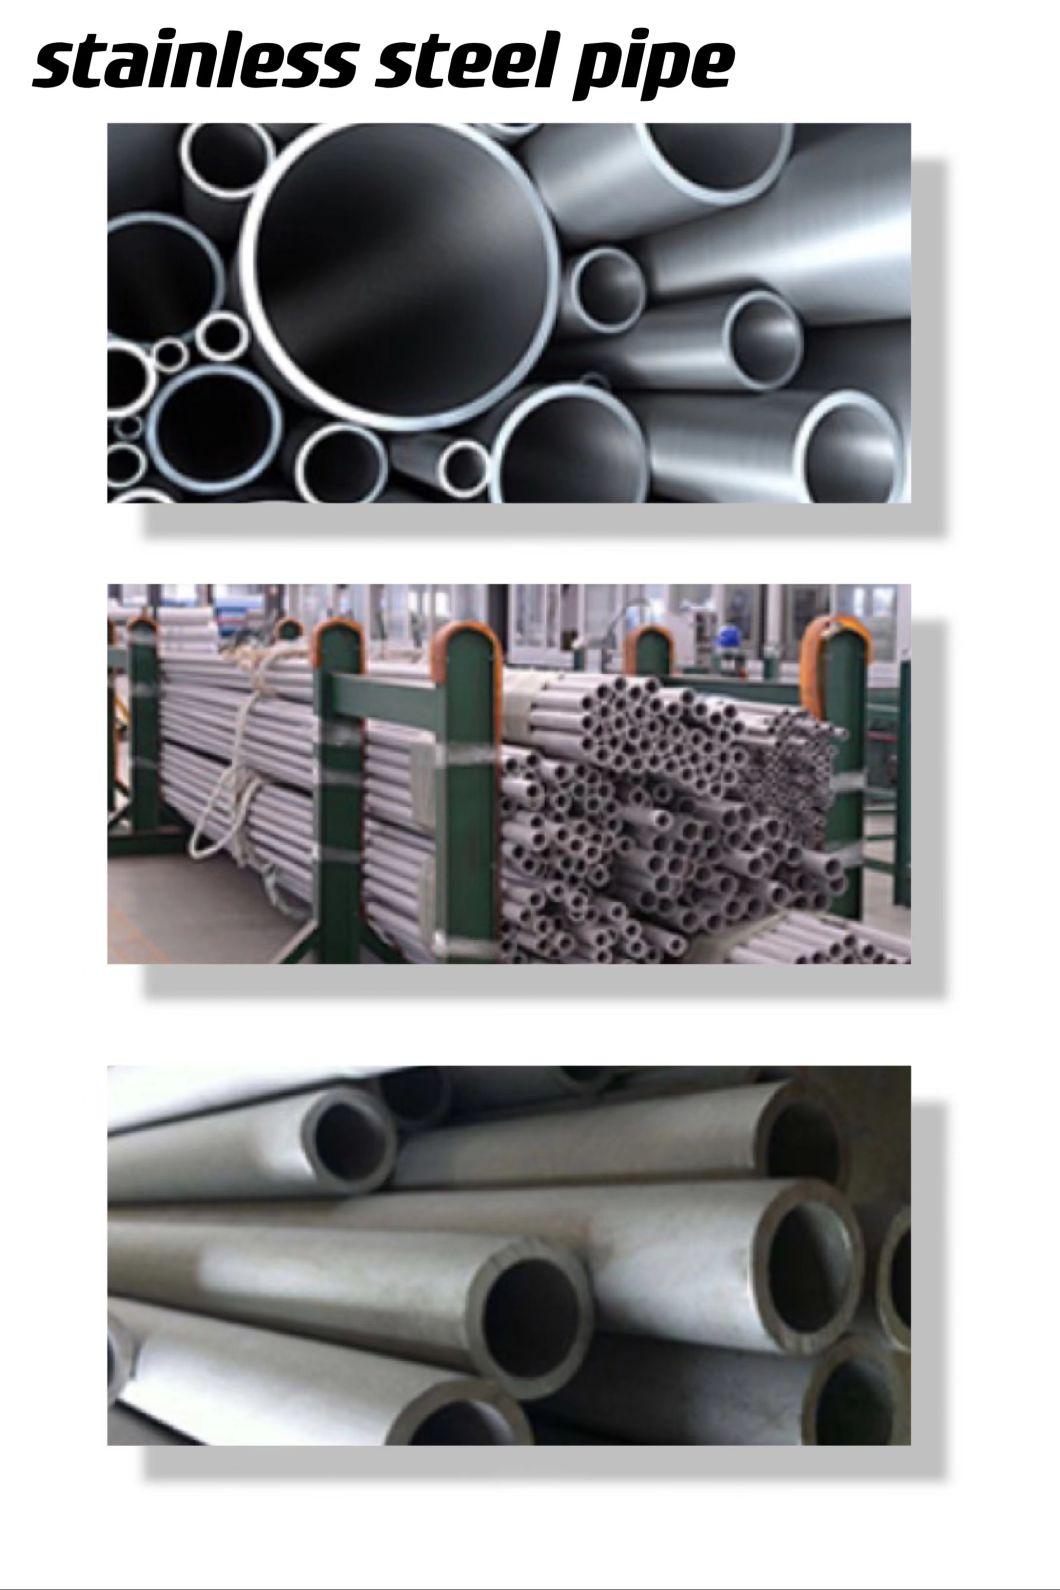 Plain End/Bevel End Stainless Steel Pipe